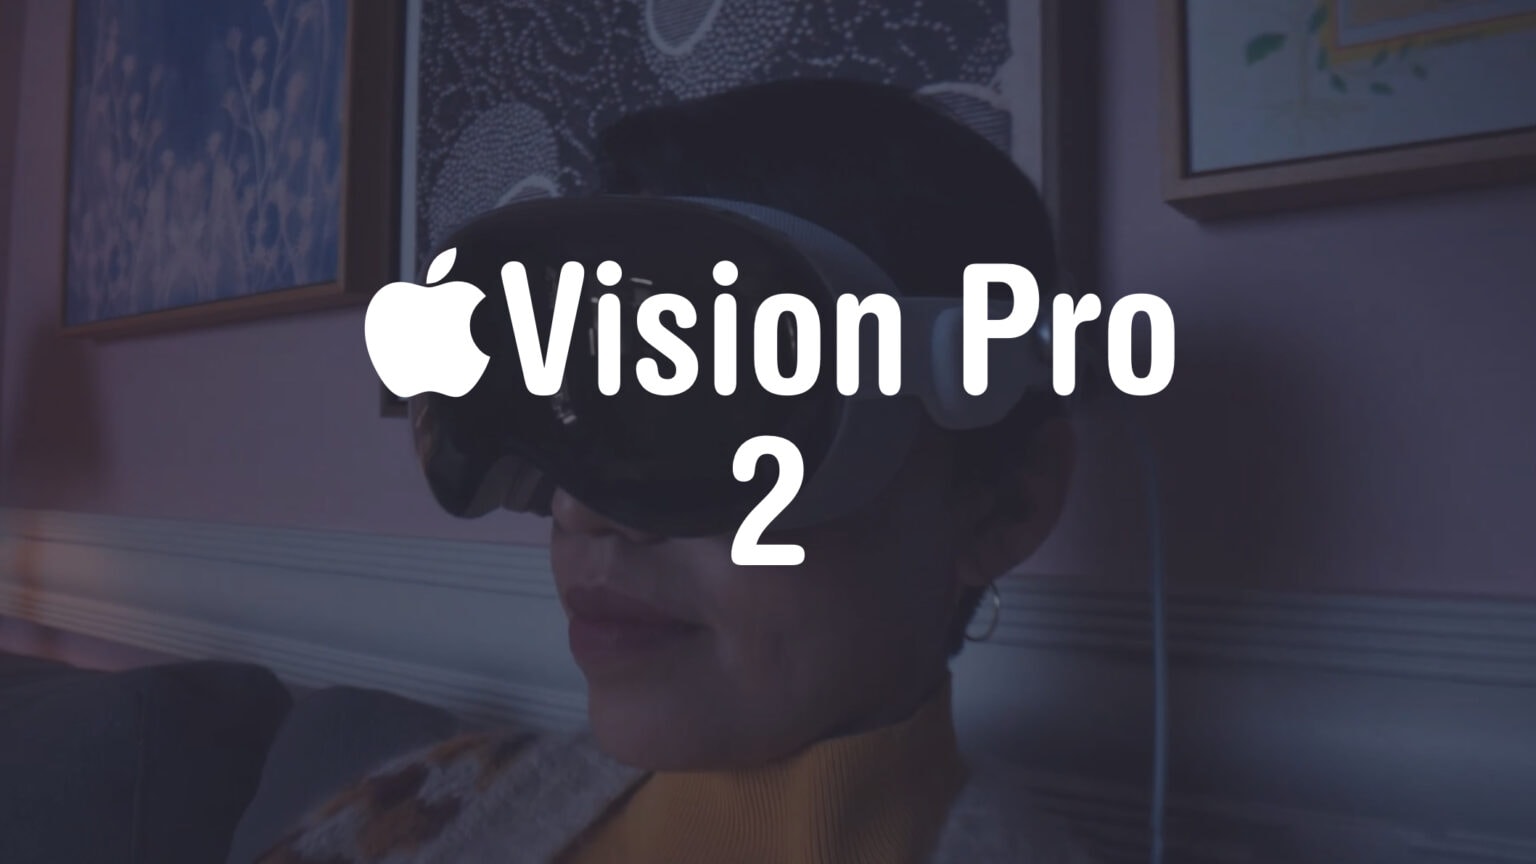 Vision Pro 2 in 2027?